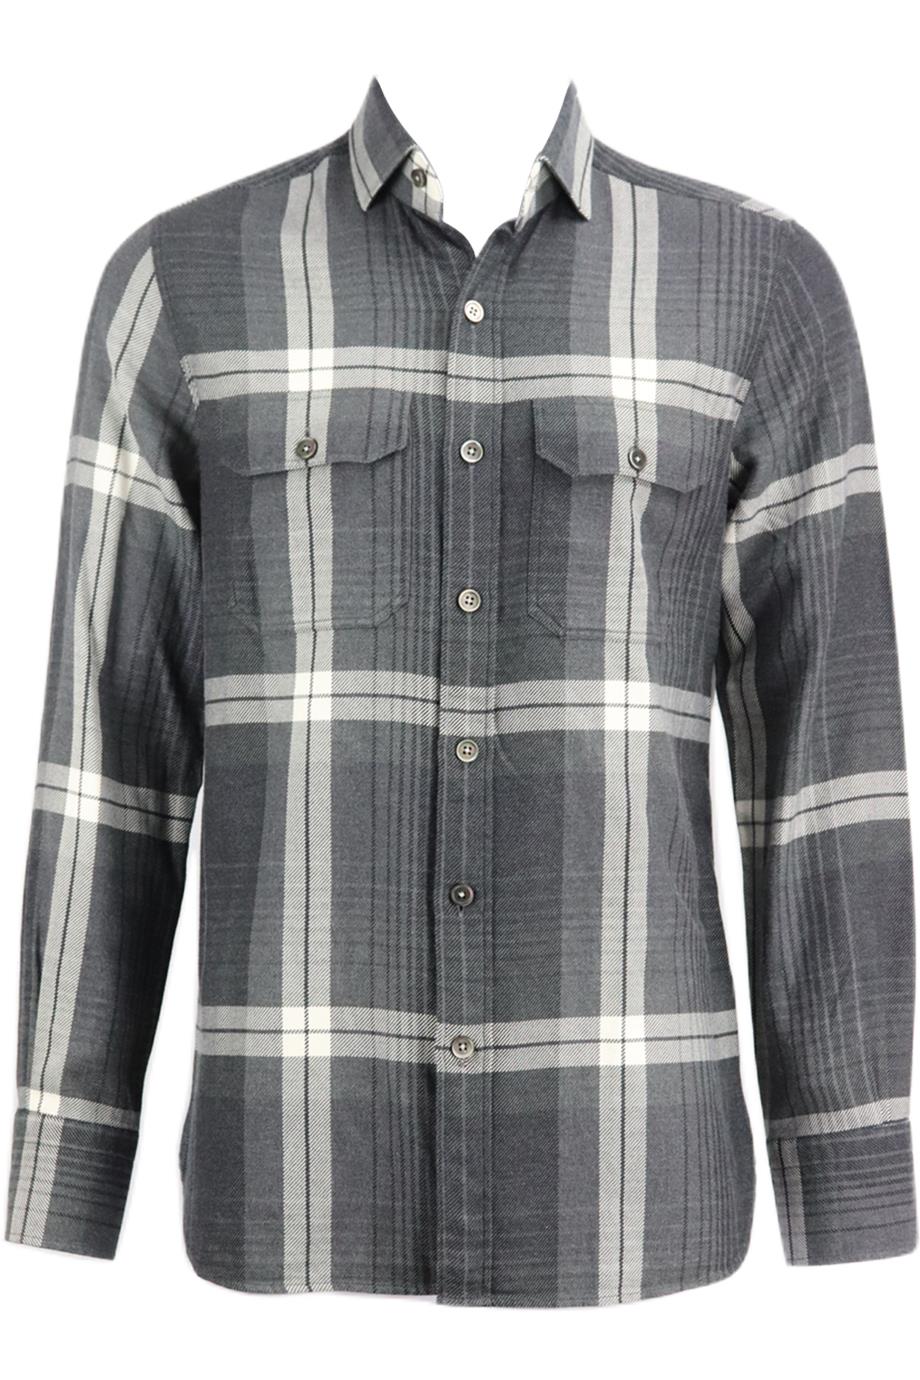 TOM FORD MEN'S CHECKED COTTON FLANNEL SHIRT IT 50 UK/US CHEST 40